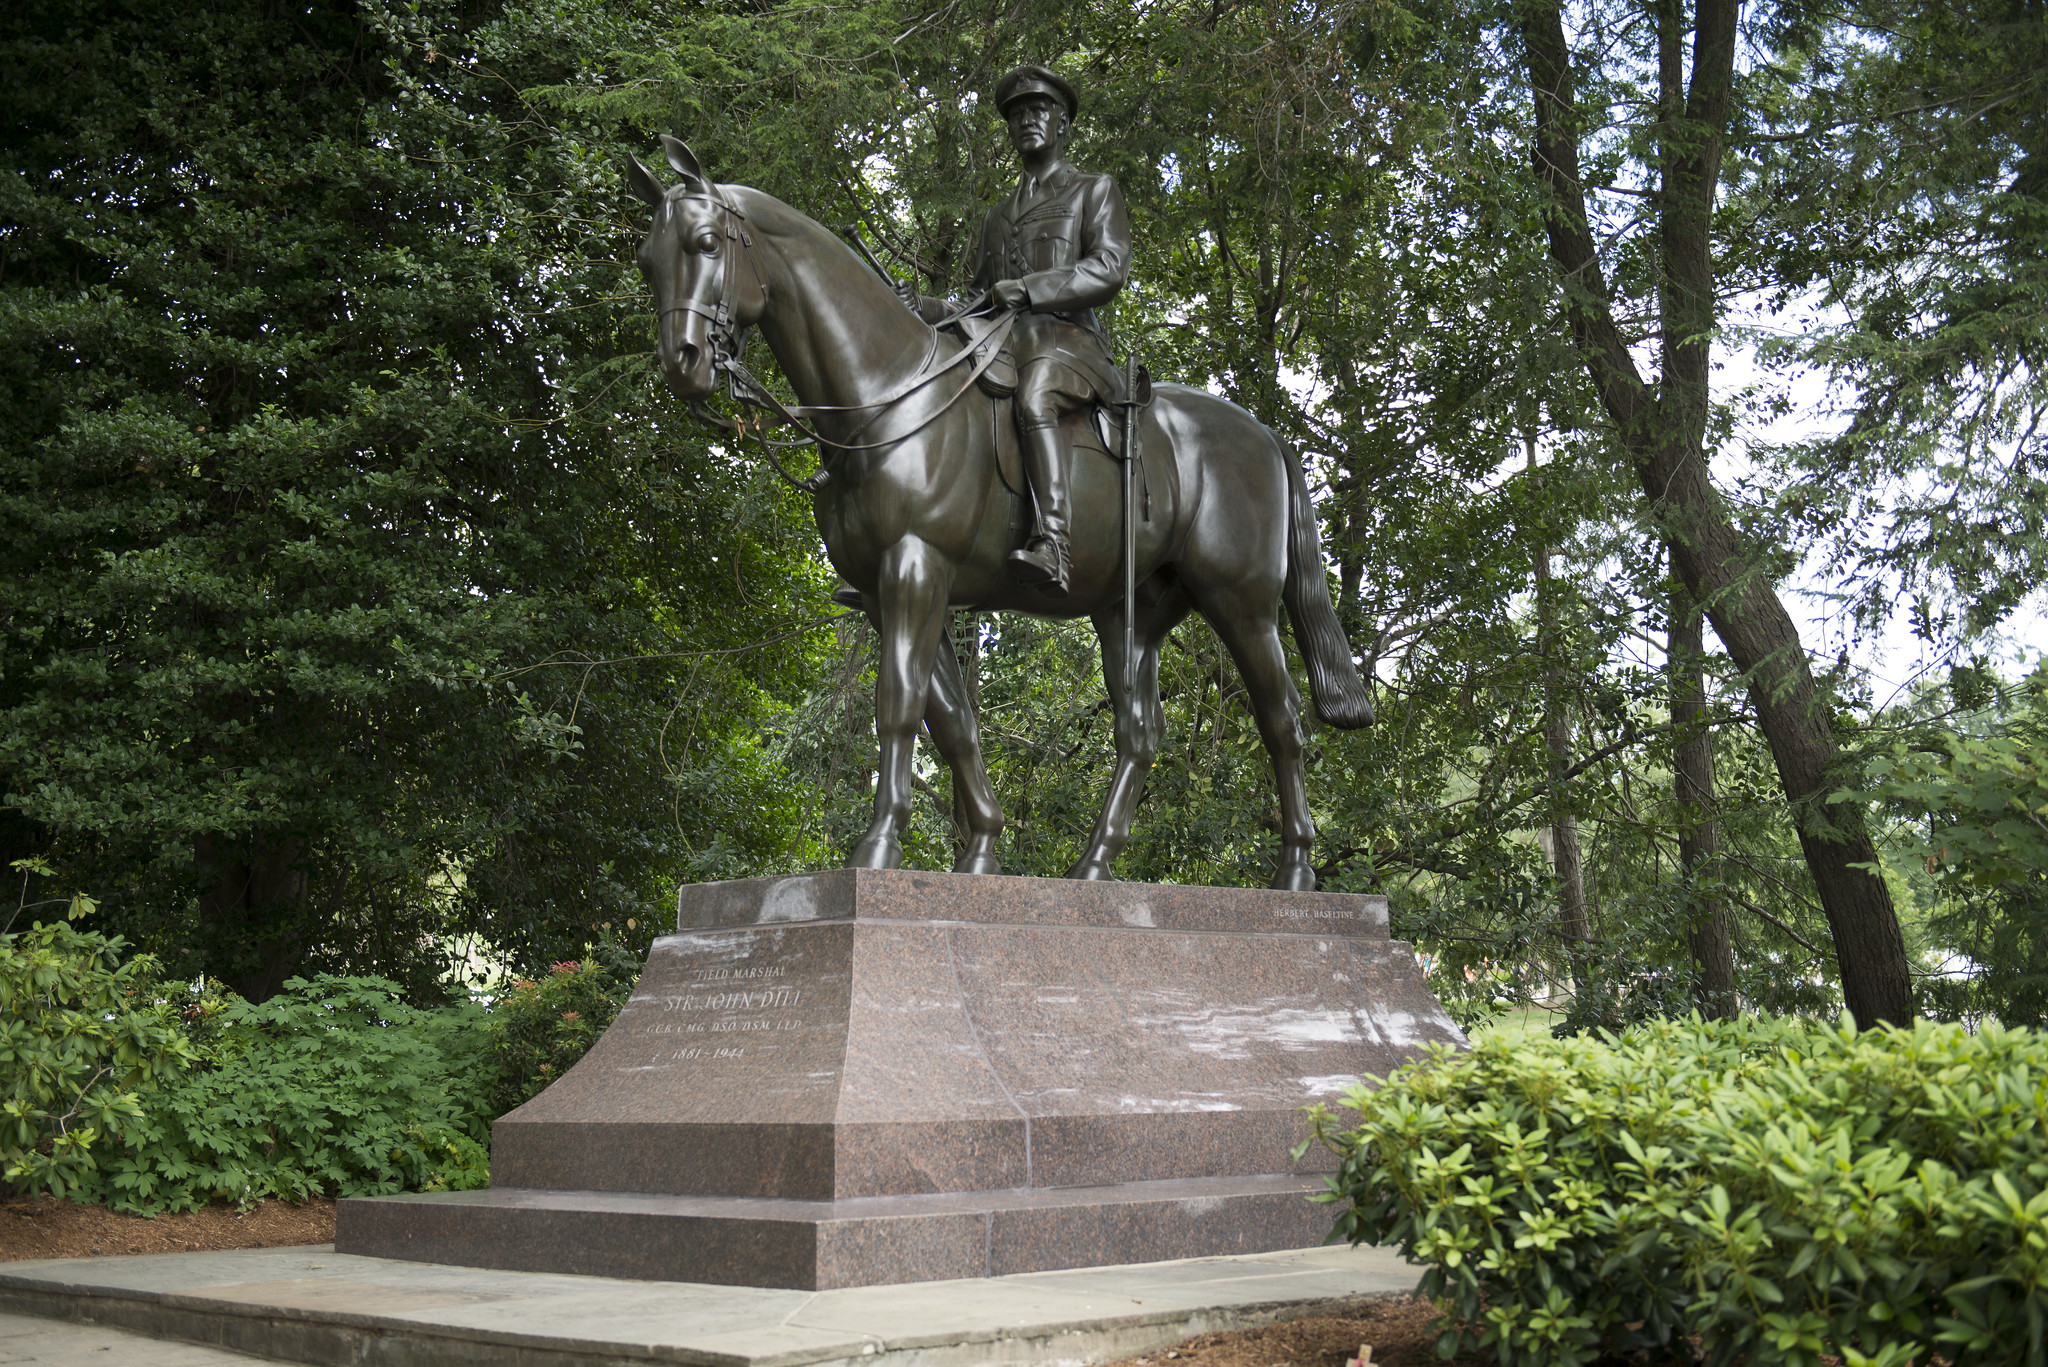 A large statue at the gravesite of Sir John Dill depicts the British military leader astride his horse